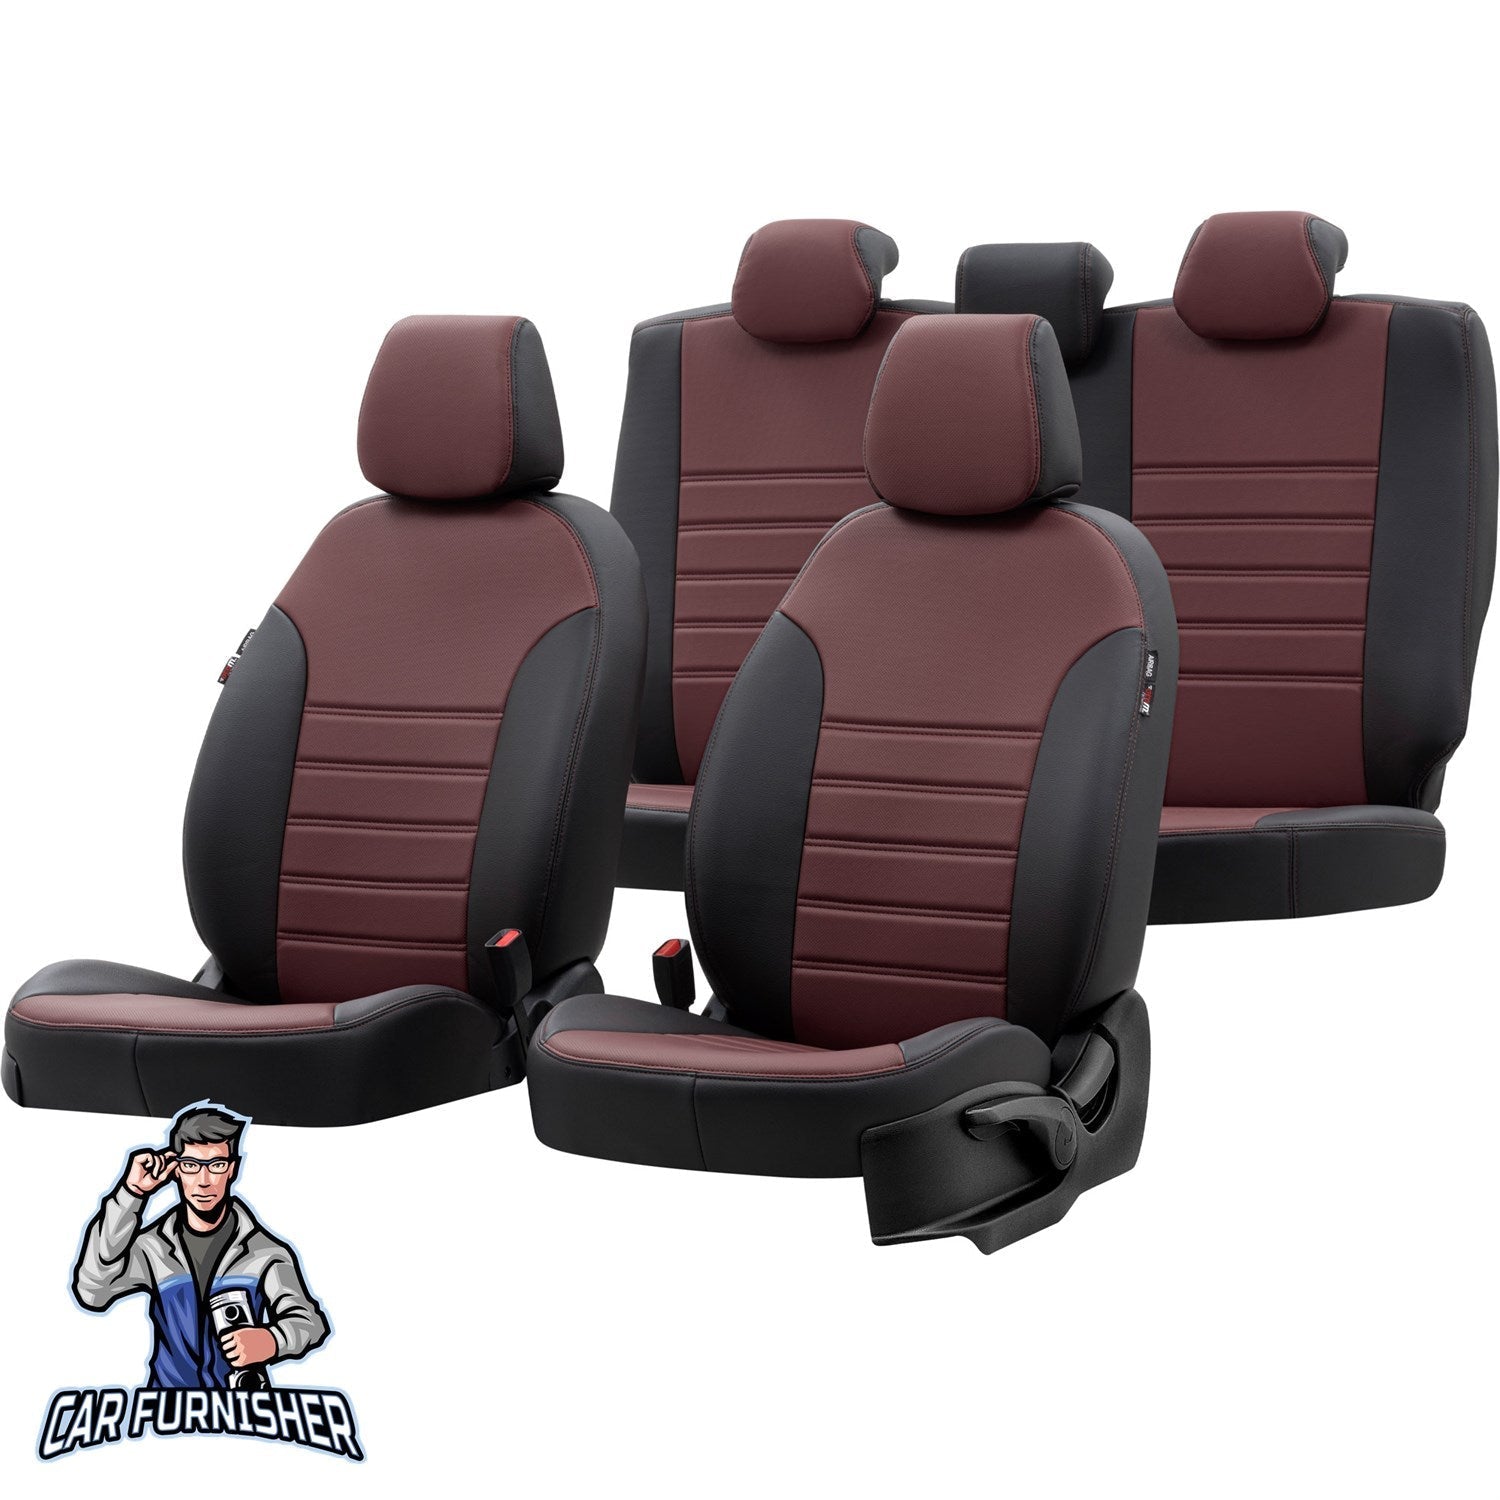 Mazda CX5 Seat Cover Istanbul Leather Design Burgundy Leather